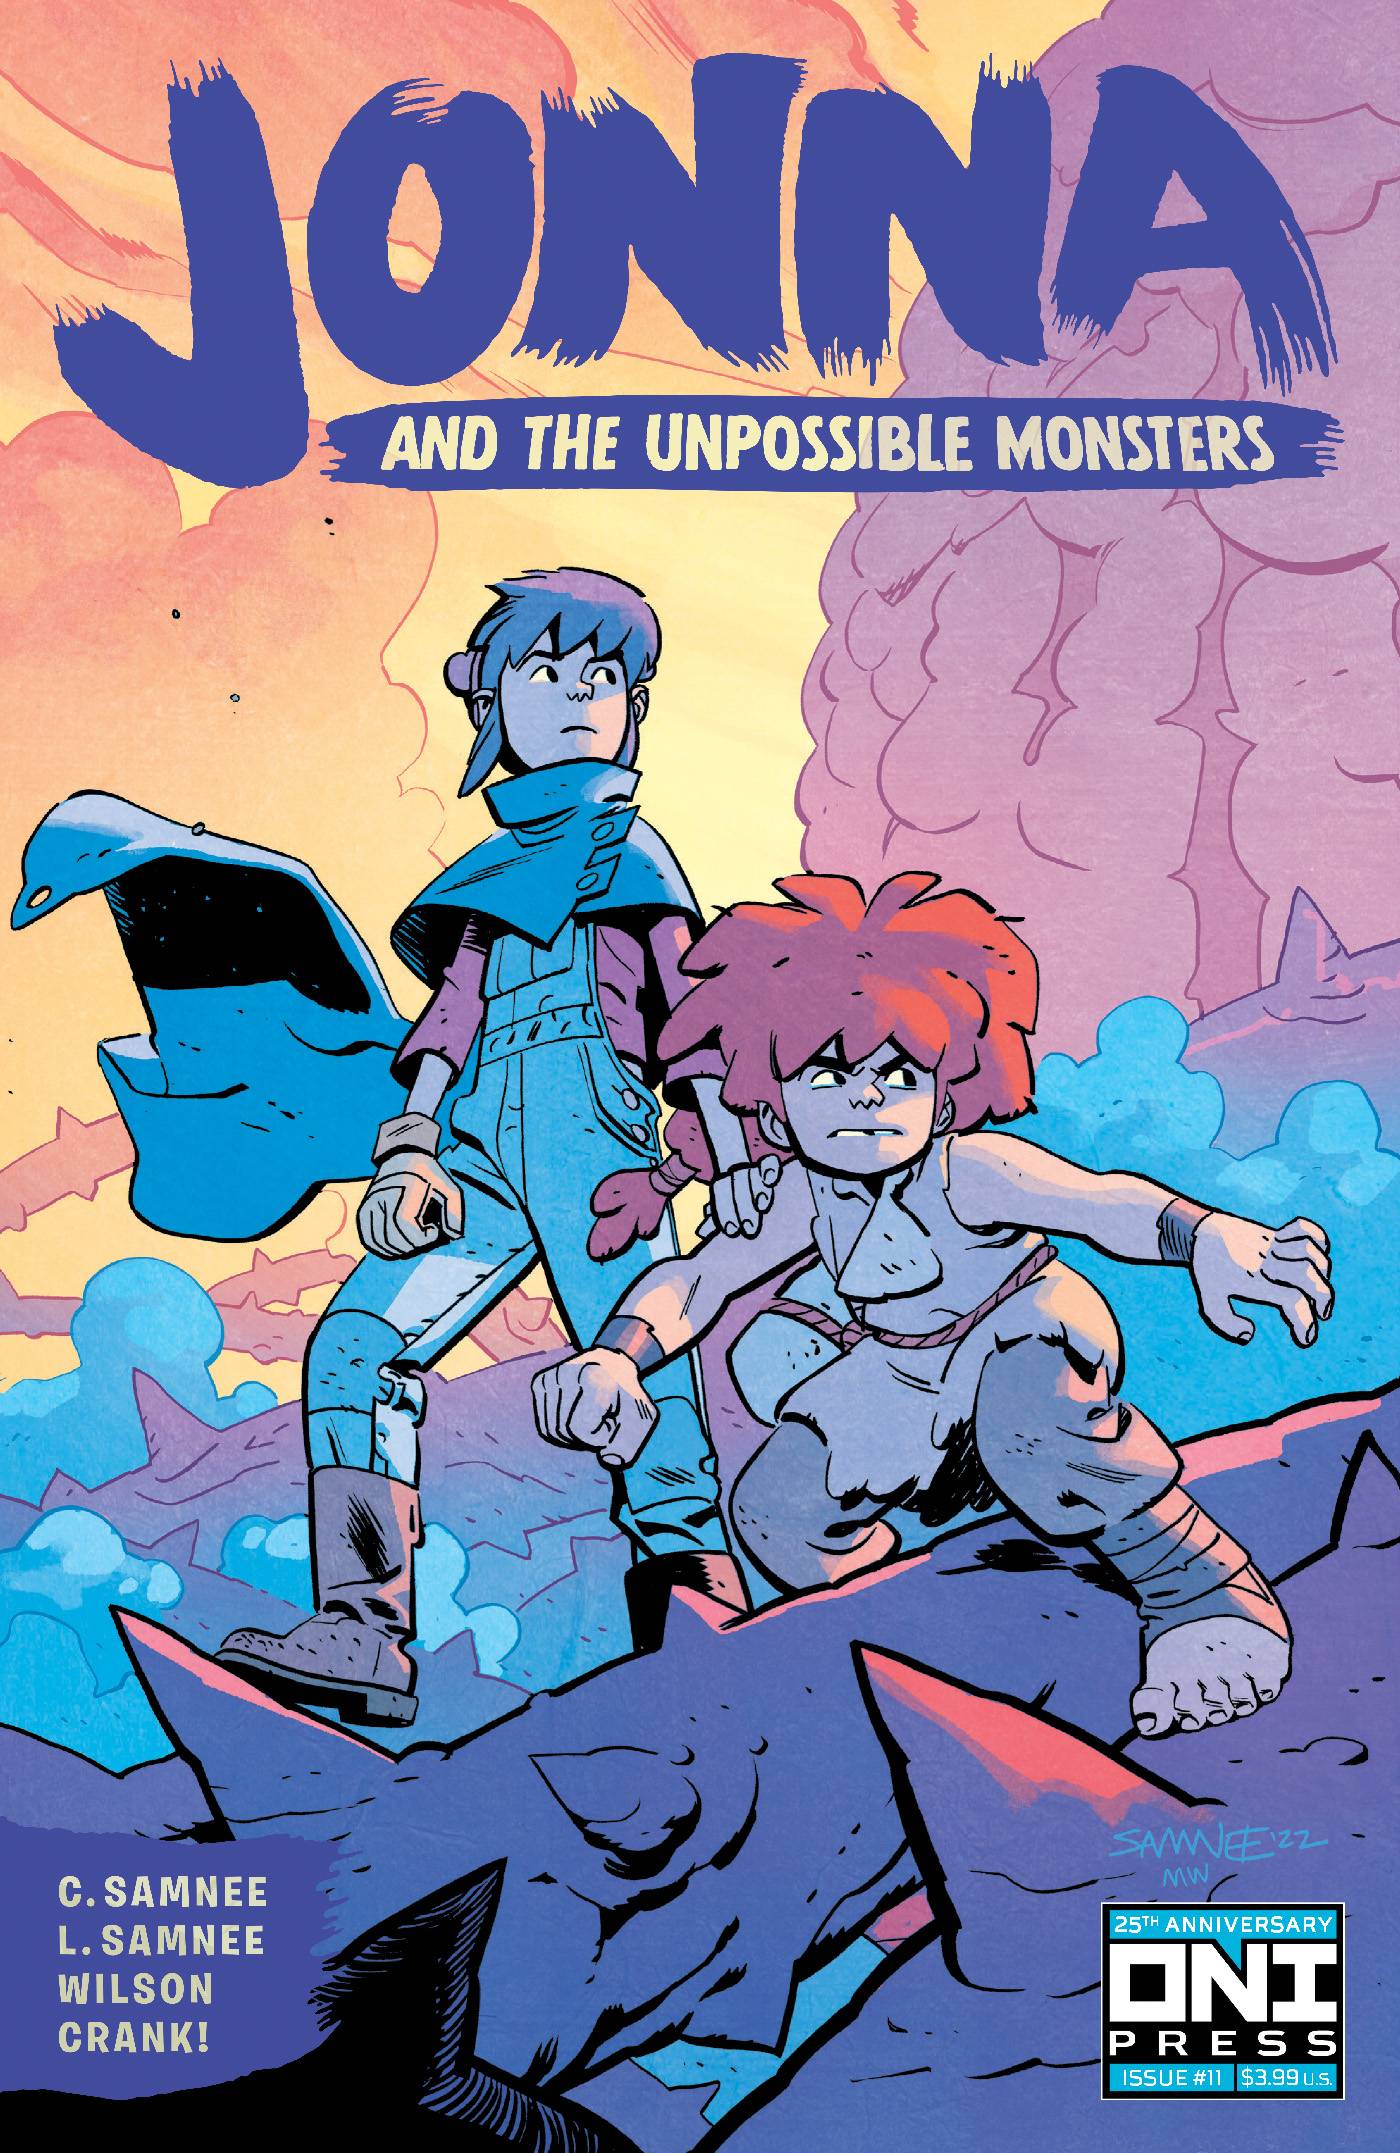 JONNA AND THE UNPOSSIBLE MONSTERS